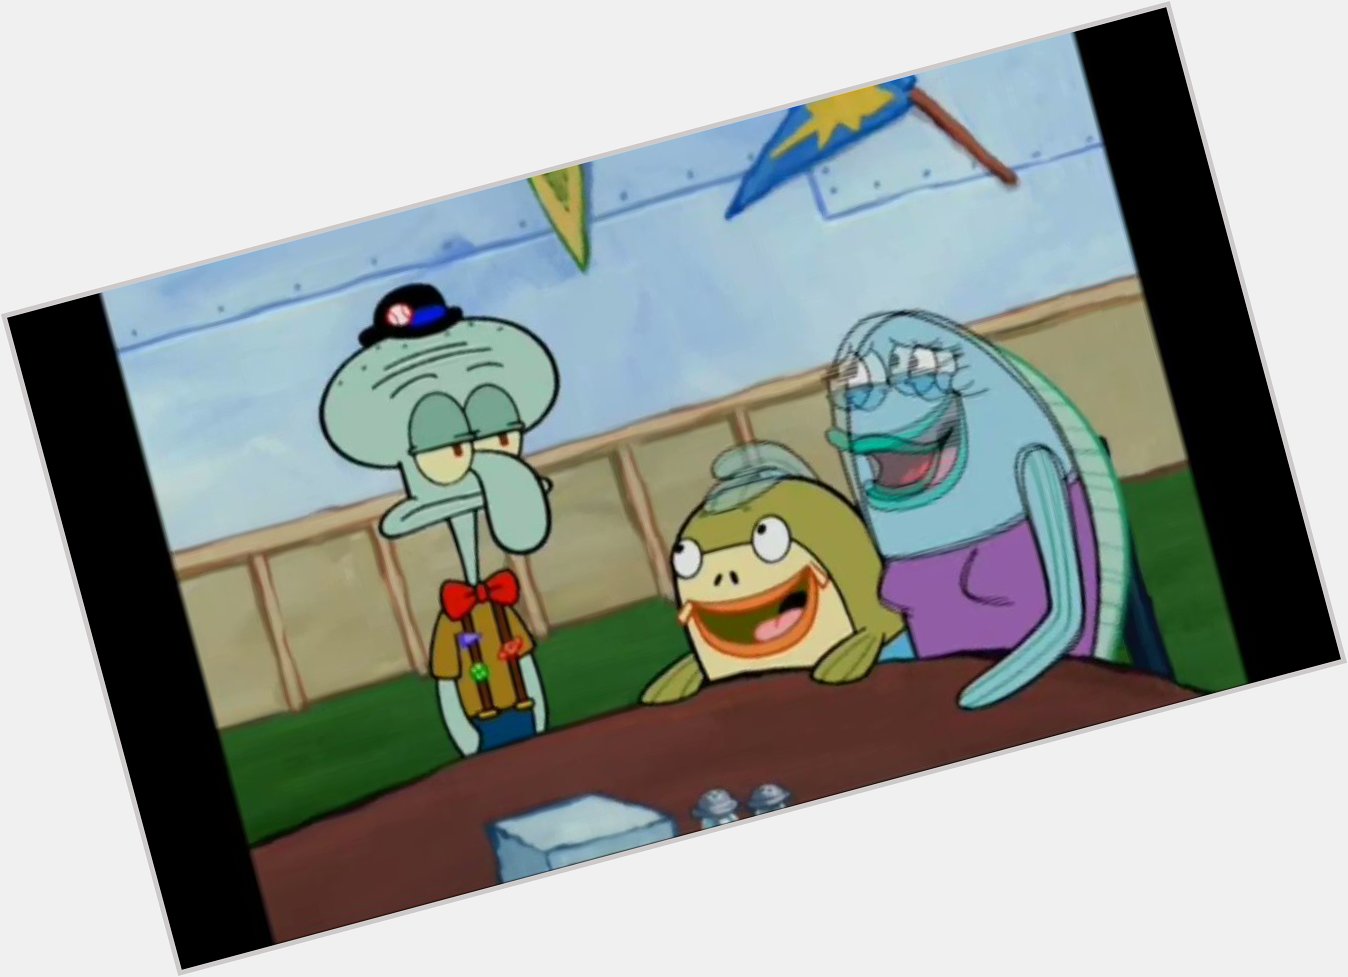 [  4 65a ] Selling Out (       )

Squidward\s Happy Birthday Song  : Rodger Bumpass 